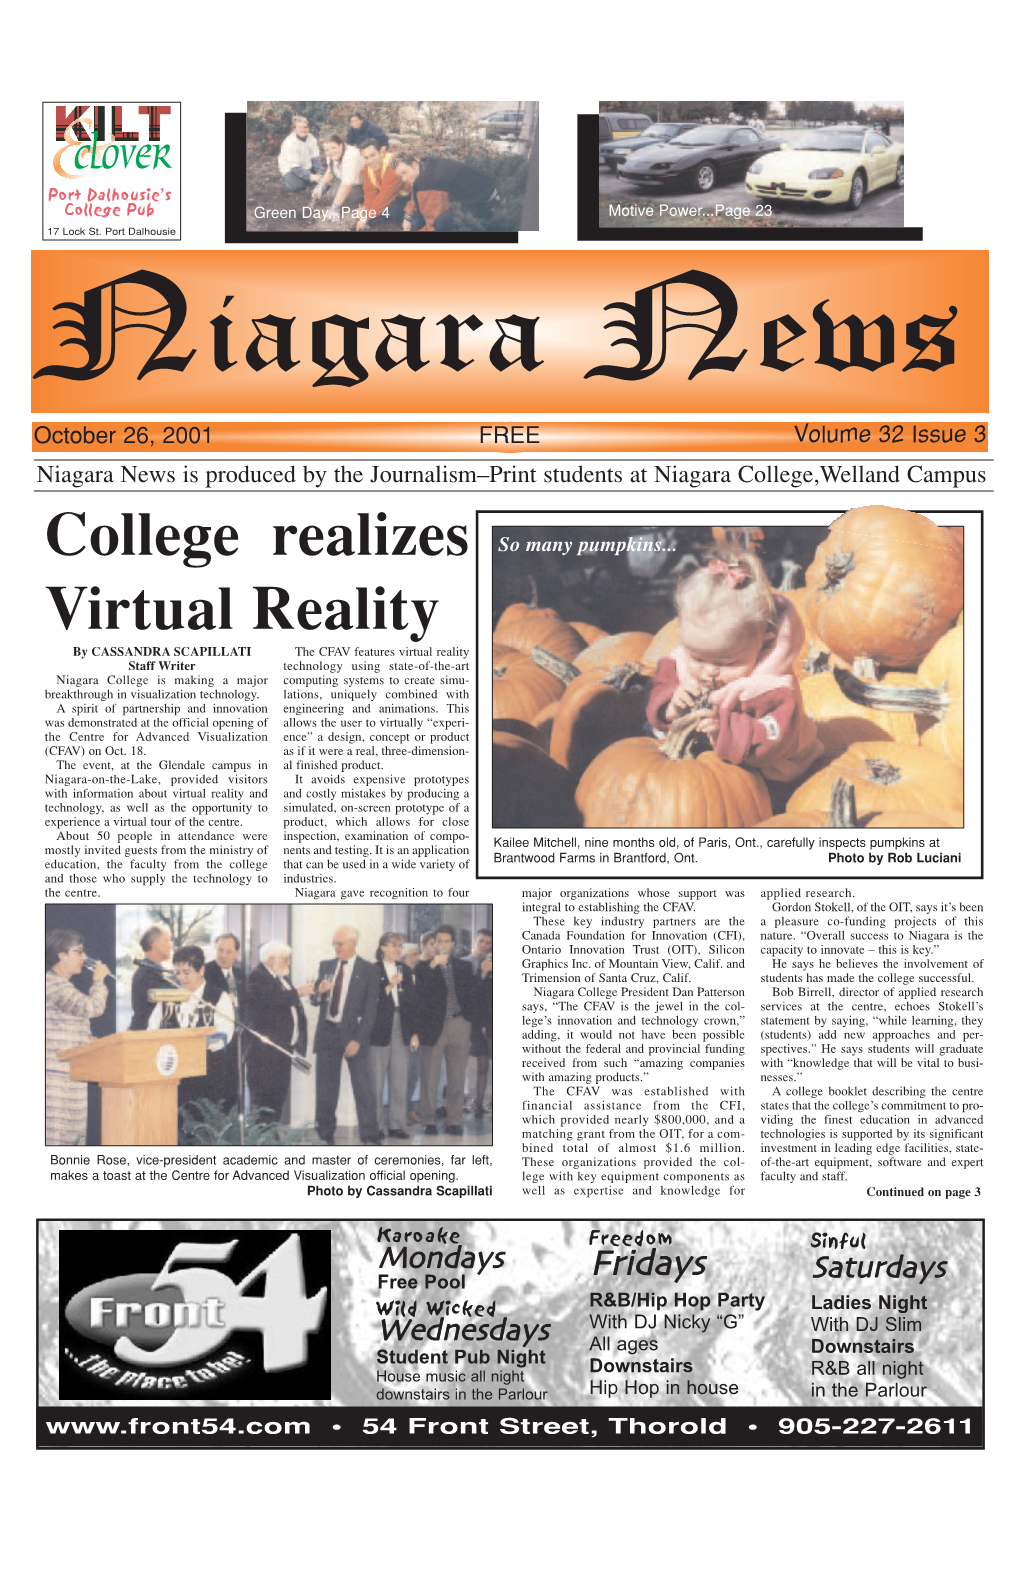 October 26, 2001 FREE Volume 32 Issue 3 Niagara News Is Produced by the Journalism–Print Students at Niagara College,Welland Campus